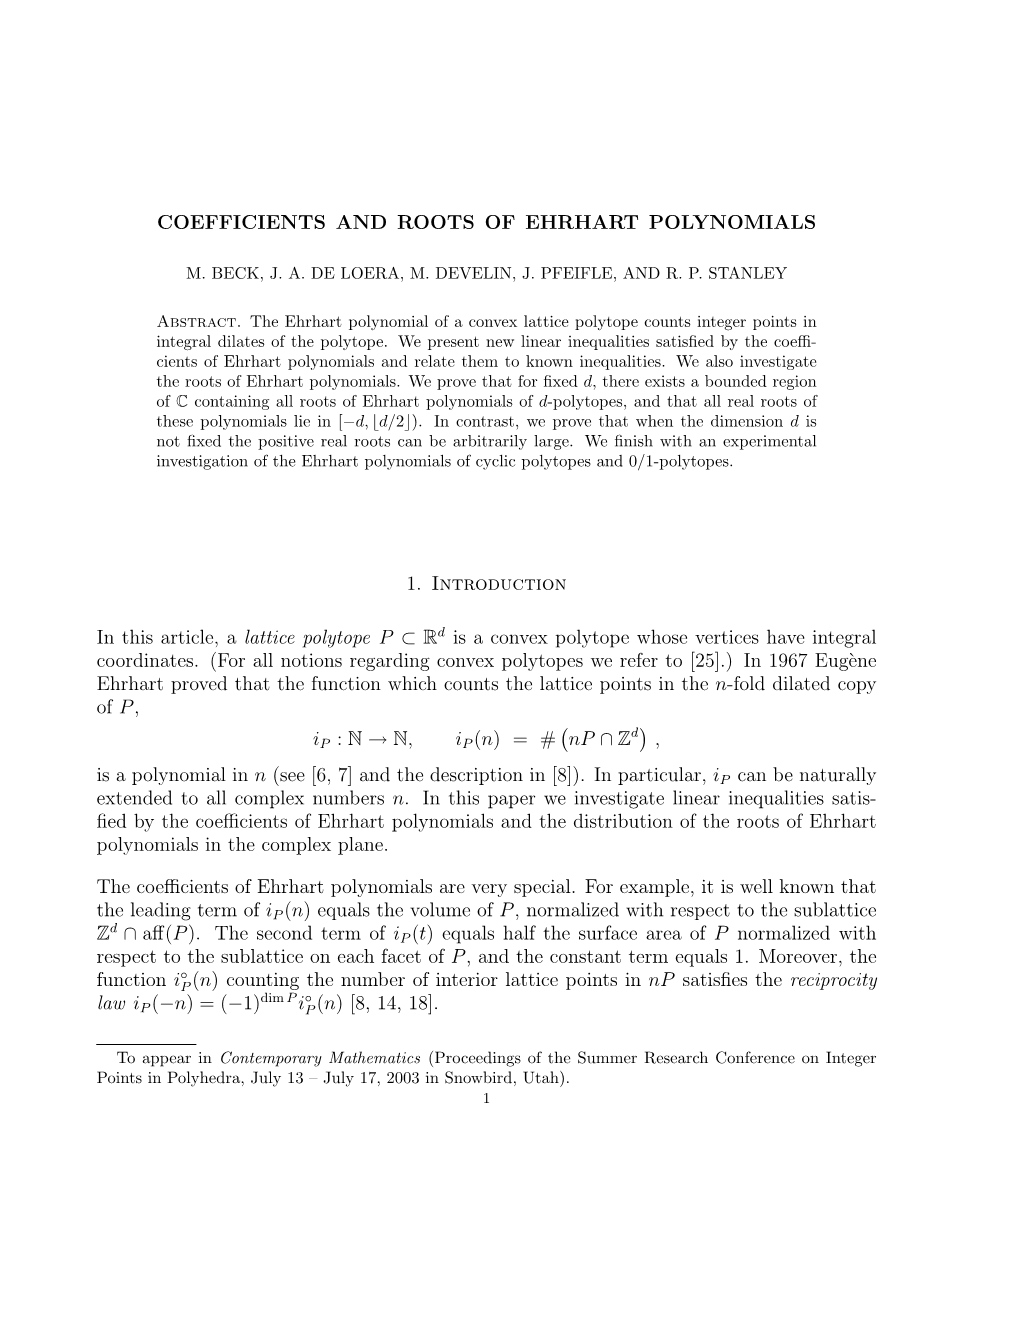 Coefficients and Roots of Ehrhart Polynomials